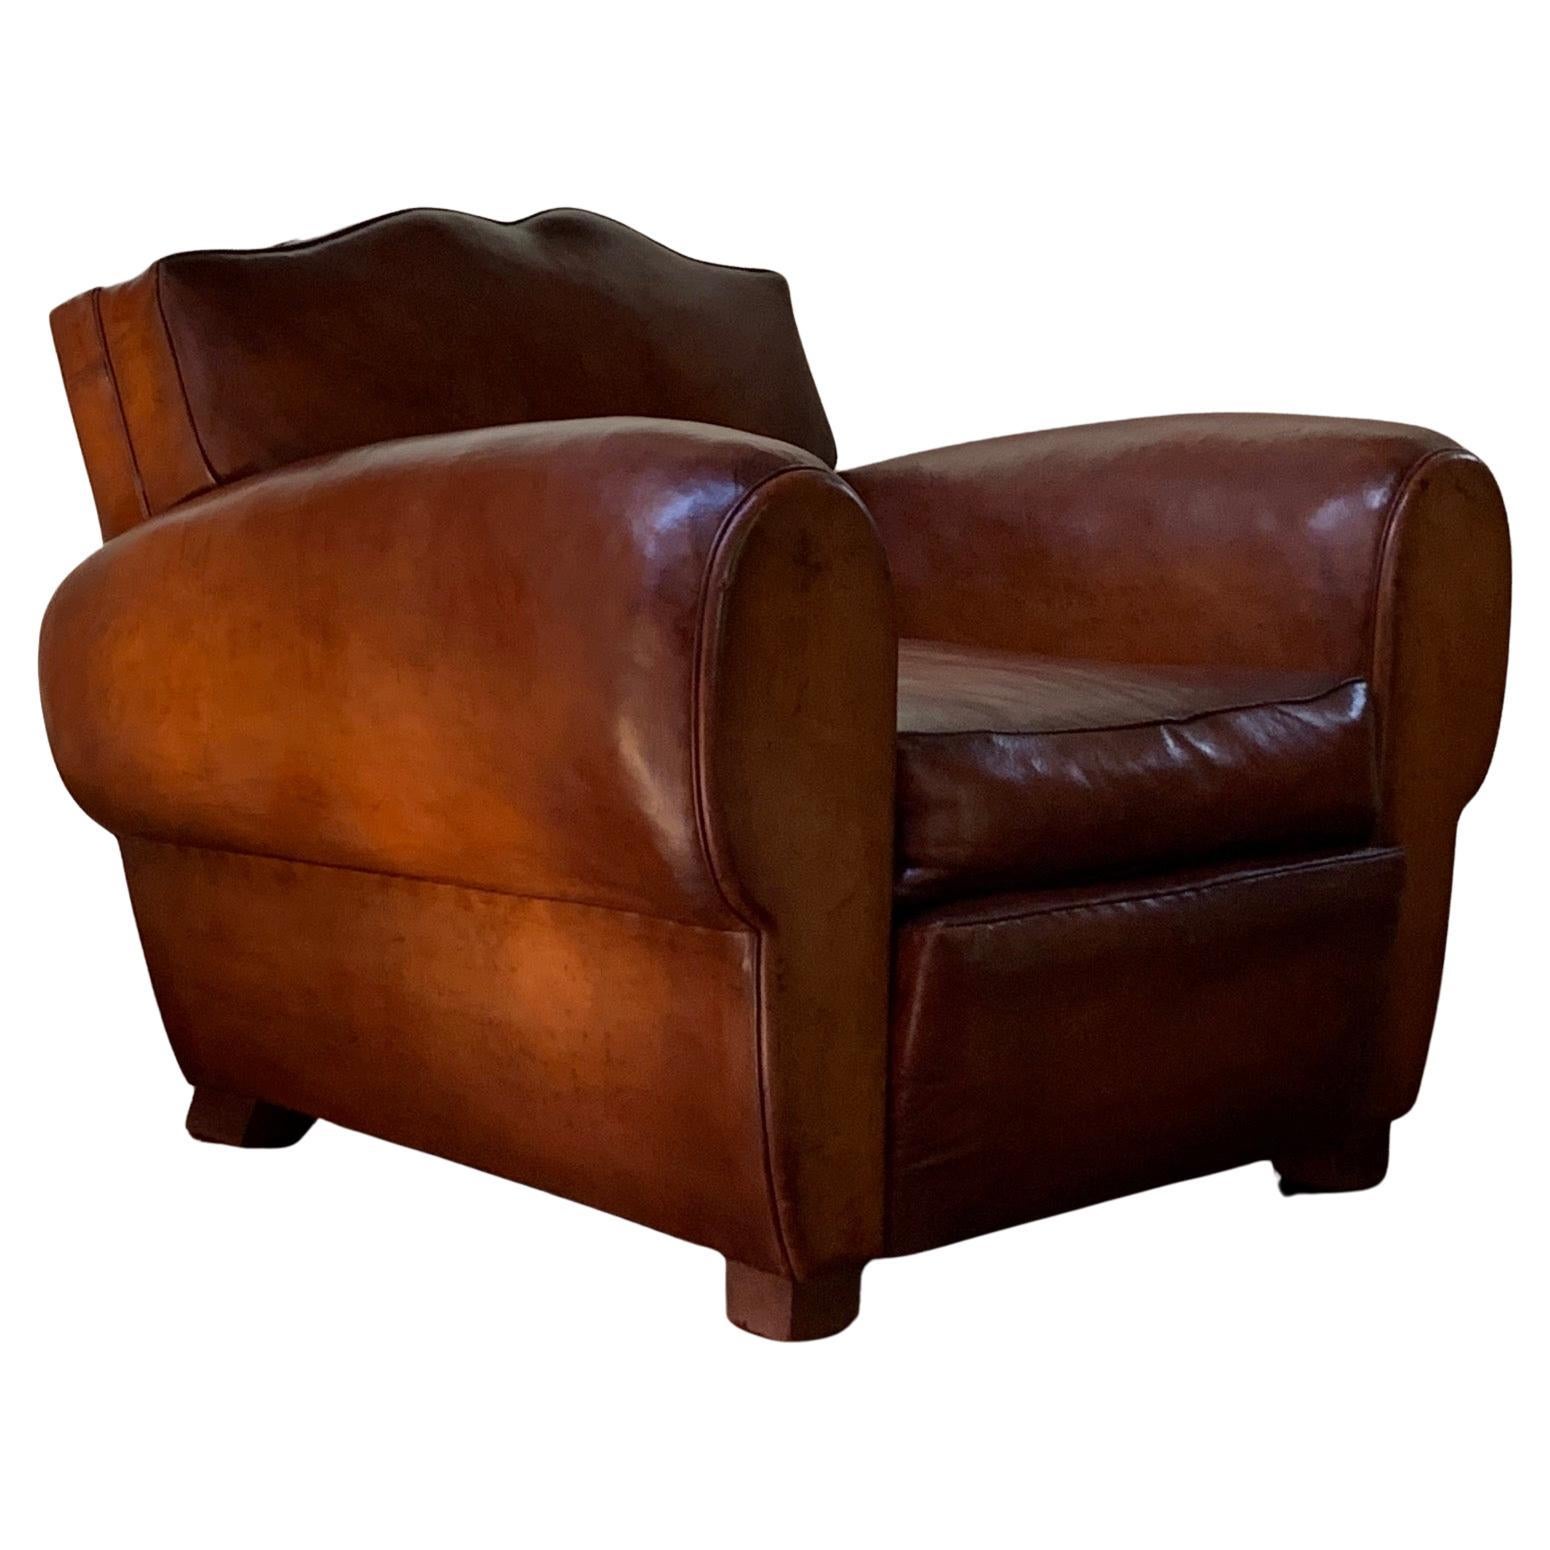 A Remarkable French Leather Club Chair, Moustache Back in Light Havana c1930's